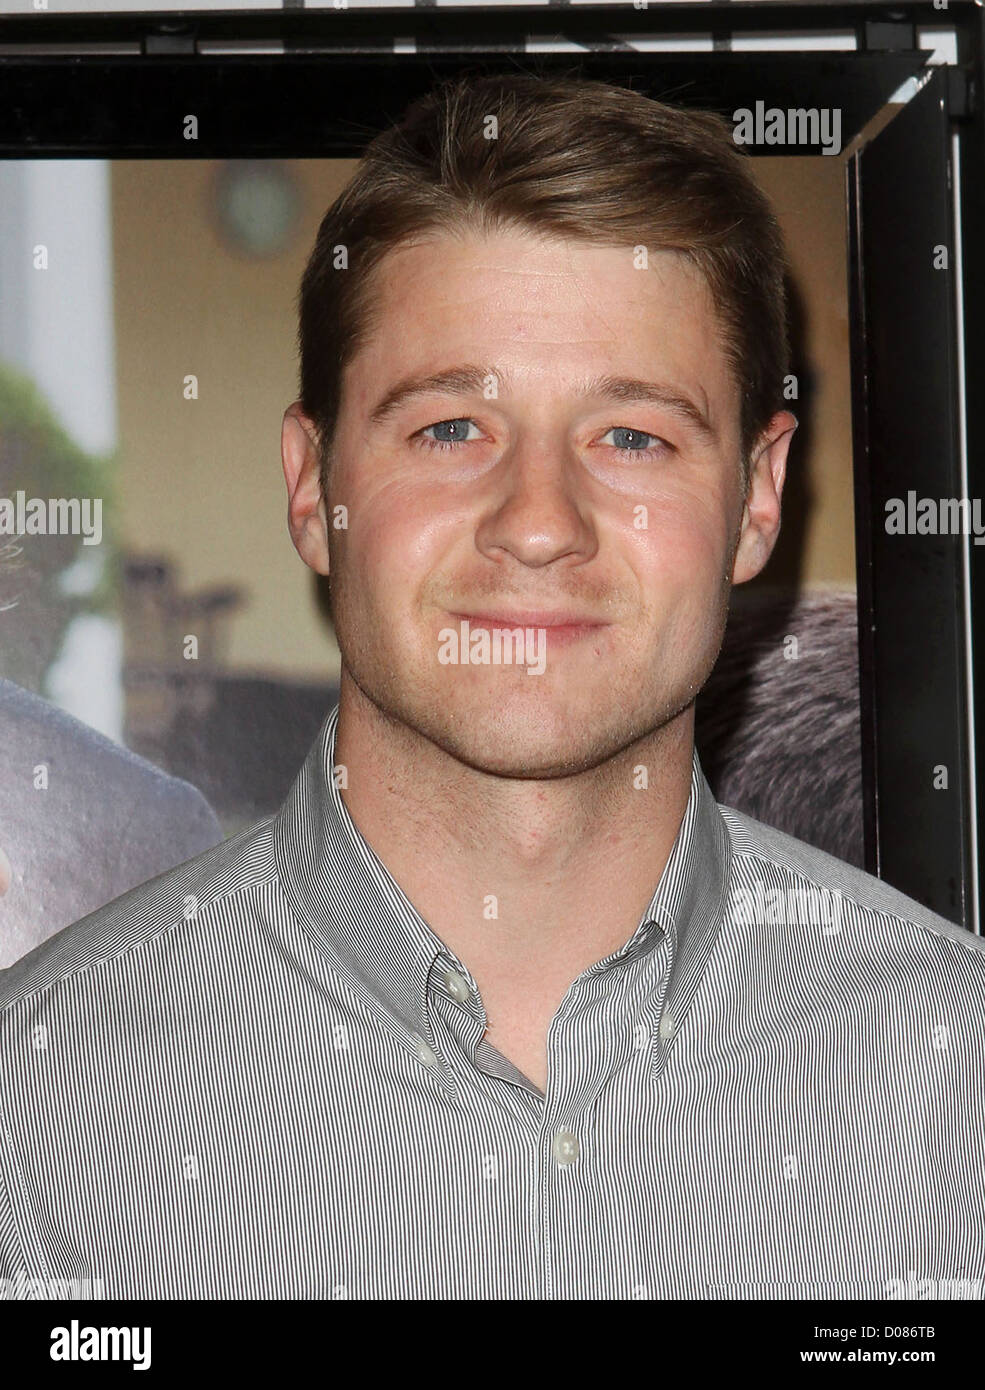 Benjamin McKenzie AFI Fest 2010 - 'The Company Men' screening held at Grauman's Chinese Theatre - Arrivals Hollywood, Stock Photo